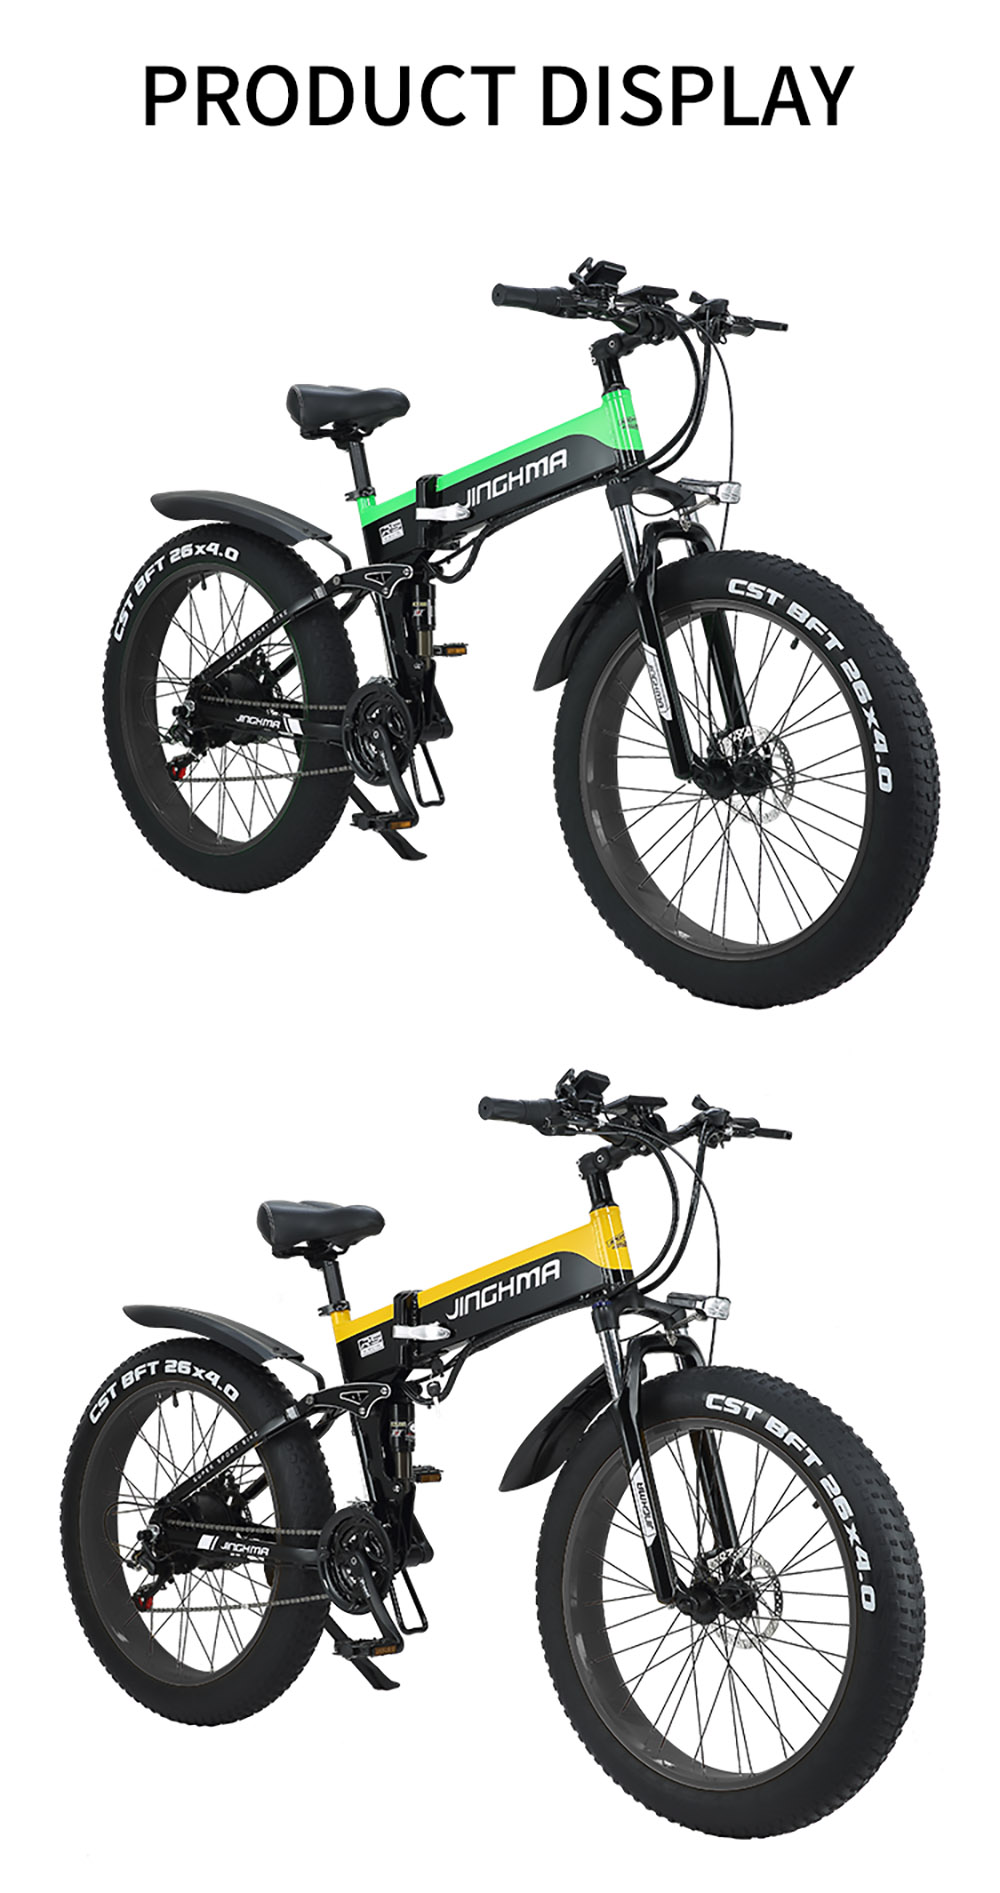 JINGHMA R5 1000W 48V 12.8Ah 26*4.0 Inch Fat Electric Bicycle 50km/h Max Speed 100km Range with 2 Batteries